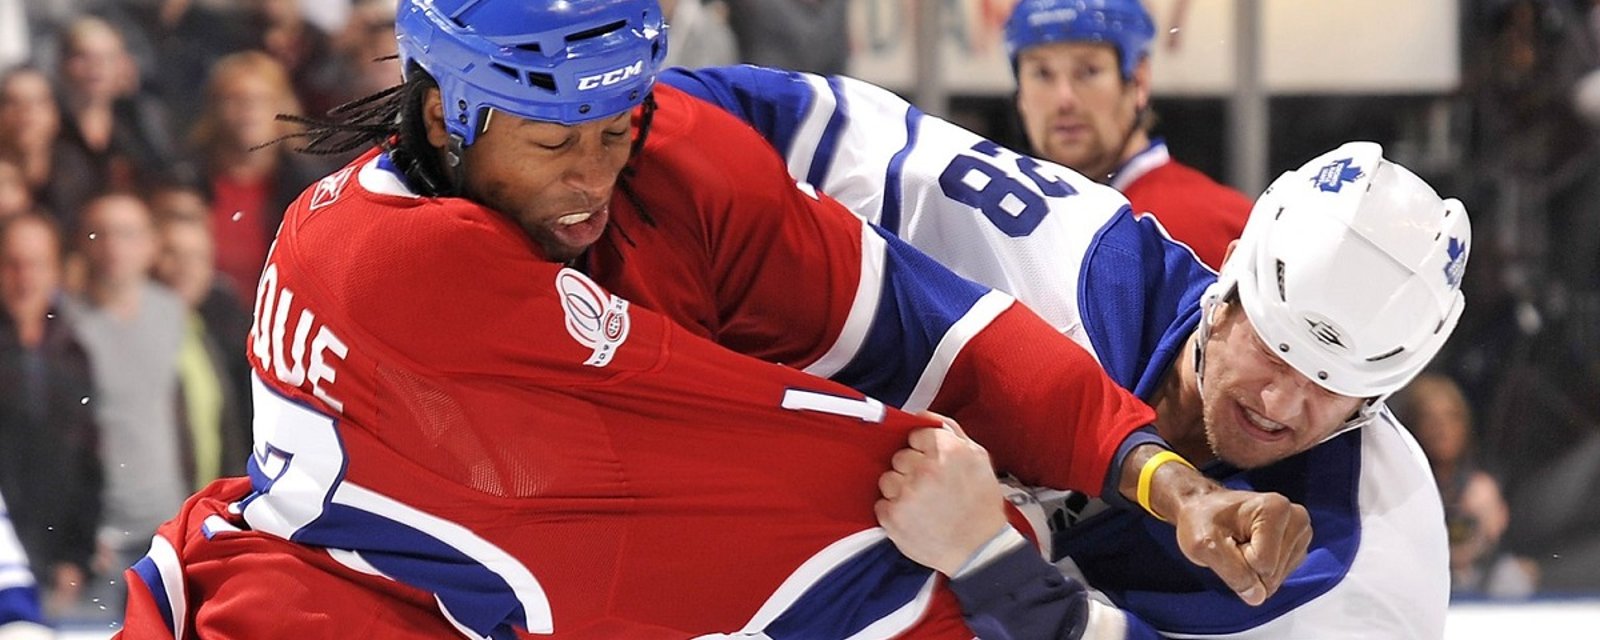 NHL Enforcer Georges Laraque emotional as he shares details of his struggle with COVID-19.